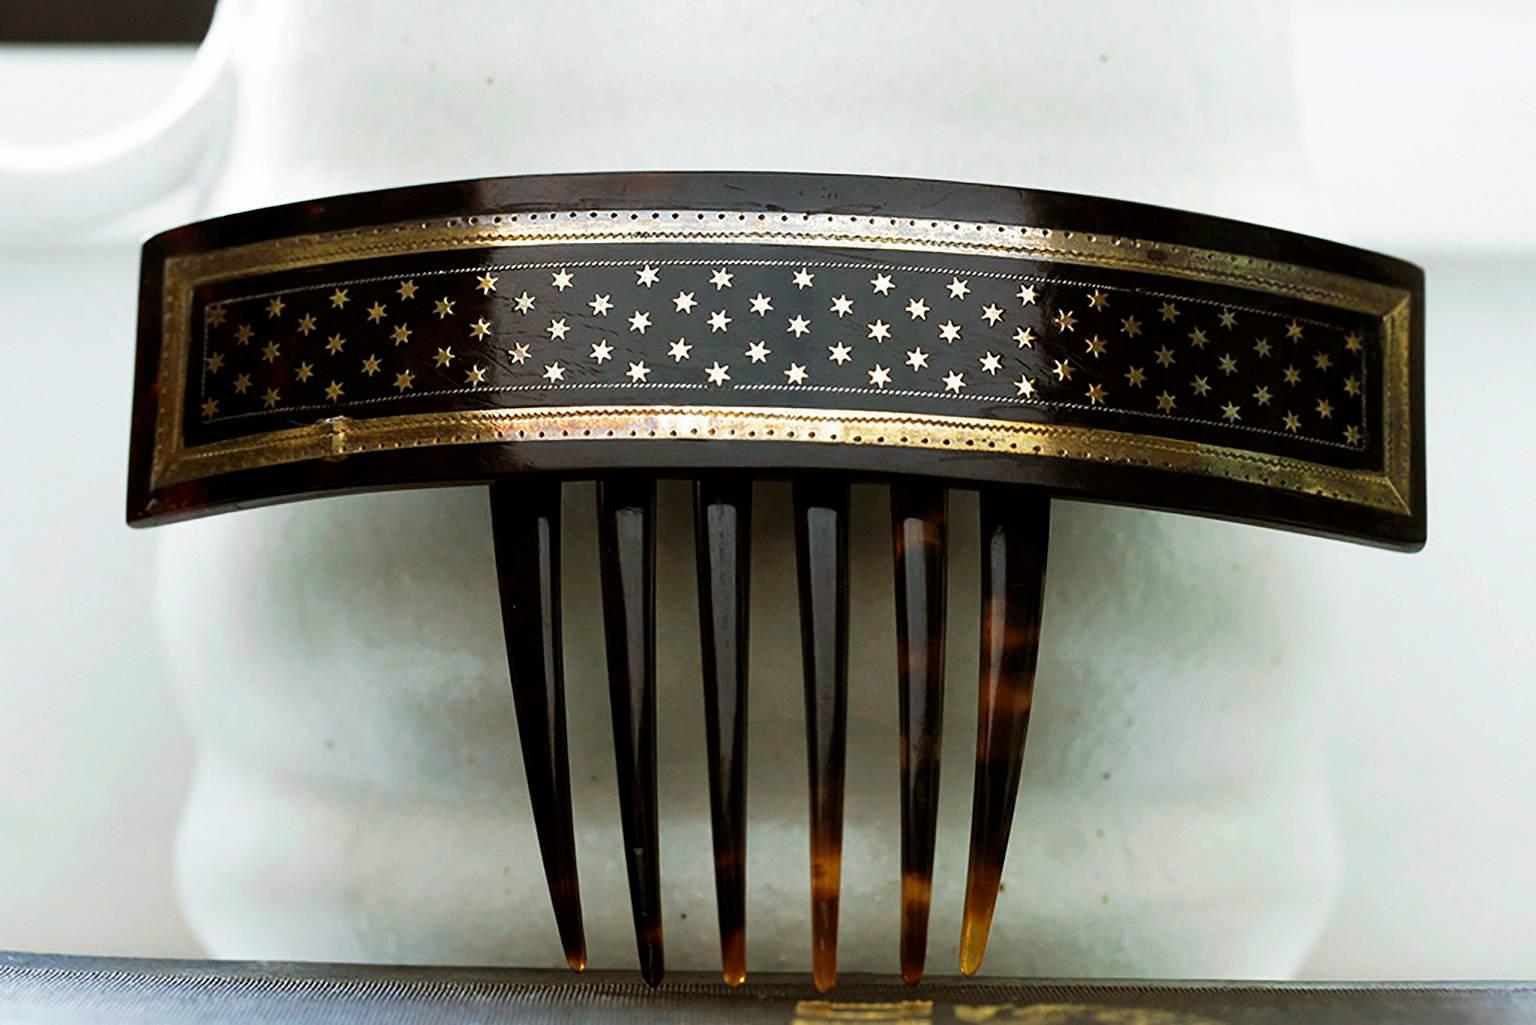 A mid Victorian piqué ‘star’ hair comb. Piqué is known to describe a 
technique in which gold or silver are inlaid onto tortoise shell to create 
patterns. This hair comb can be worn from upwards or down. The arched piece 
with stars is hinged to